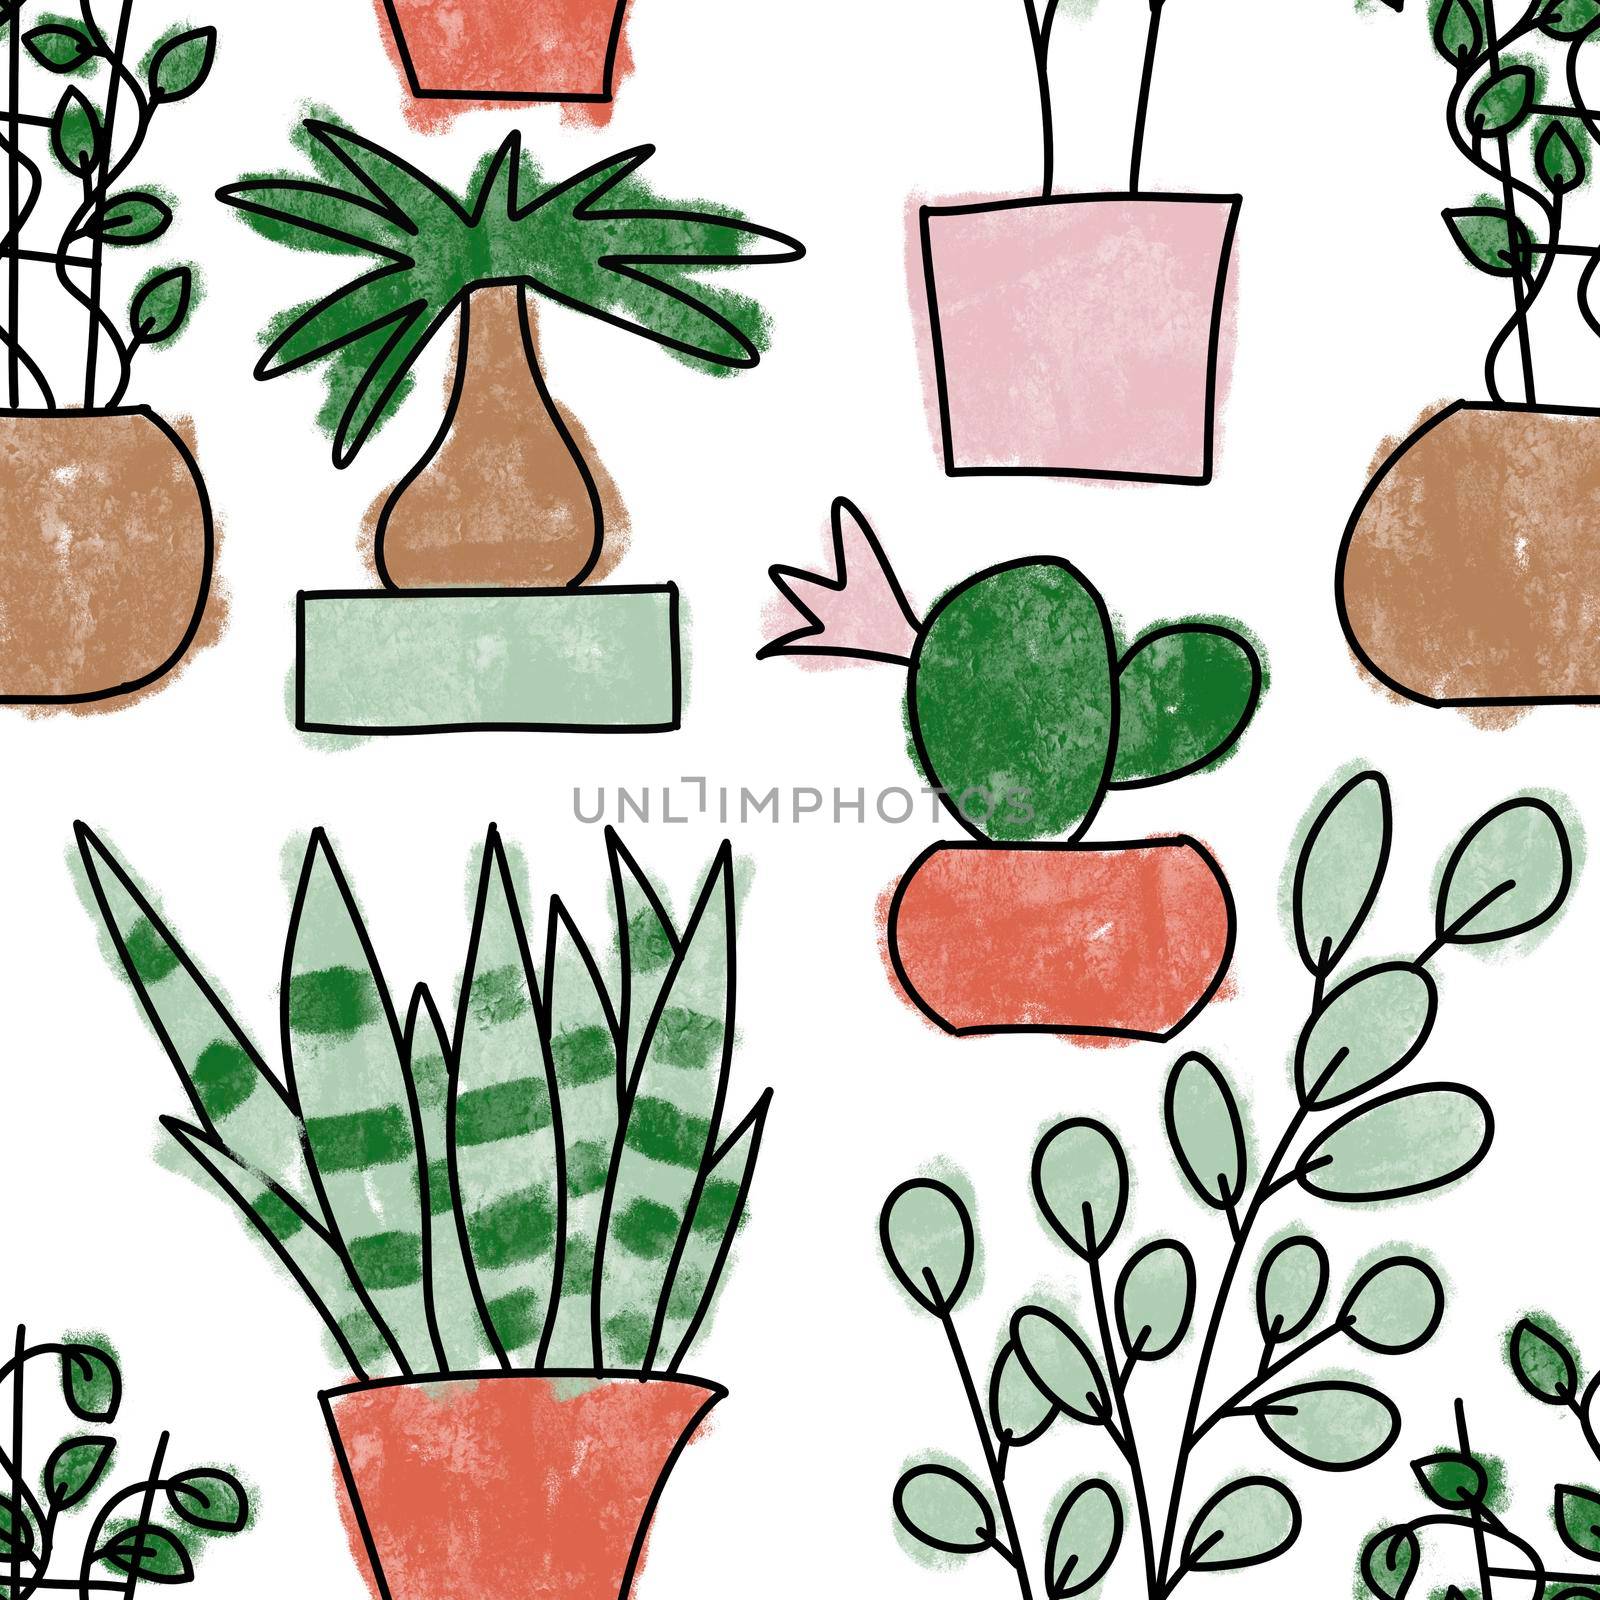 Seamless hand drawn pattern with houseplants, indoor plants flowers in pots, green leaves potted herbs. Urban jungle concept zz plant monstera snake plant peace lily cactus cacti succulent